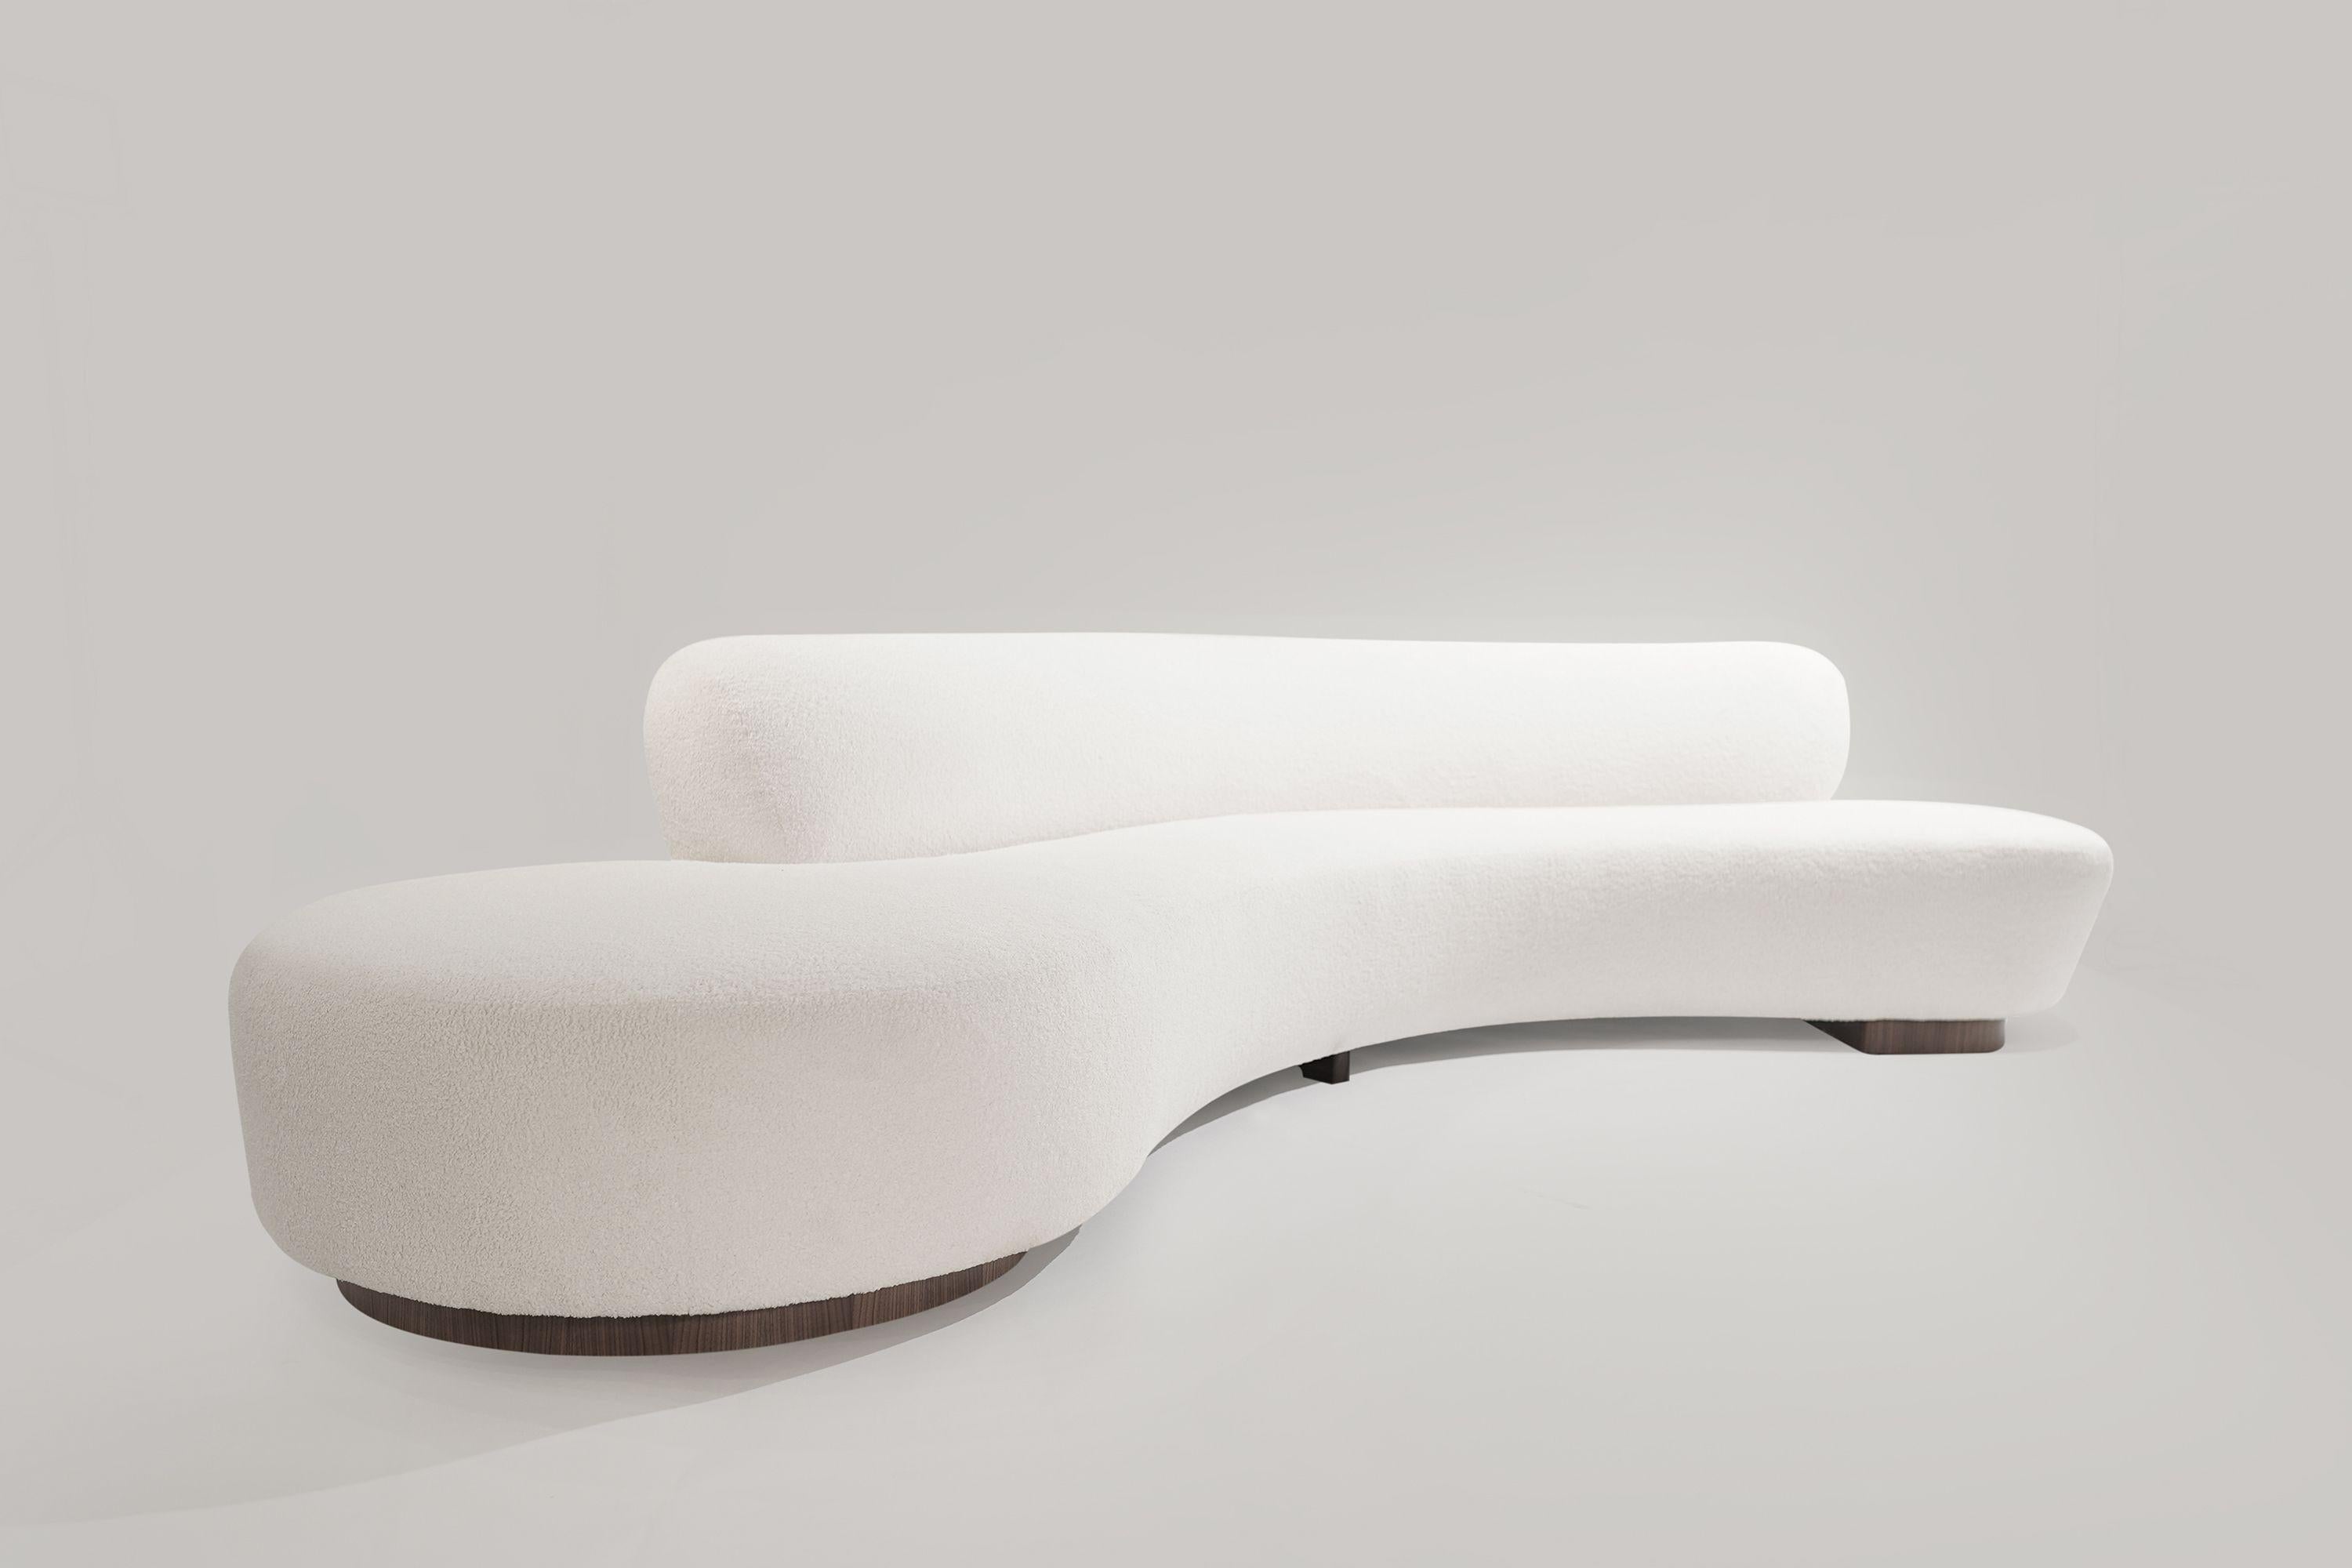 A stunning and rare Serpentine sofa, Model 150BS designed by architect and furniture designer Vladimir Kagan. It features a distinctive curved frame that gives this piece a delightful sensual design, assuring a striking proportioned profile view